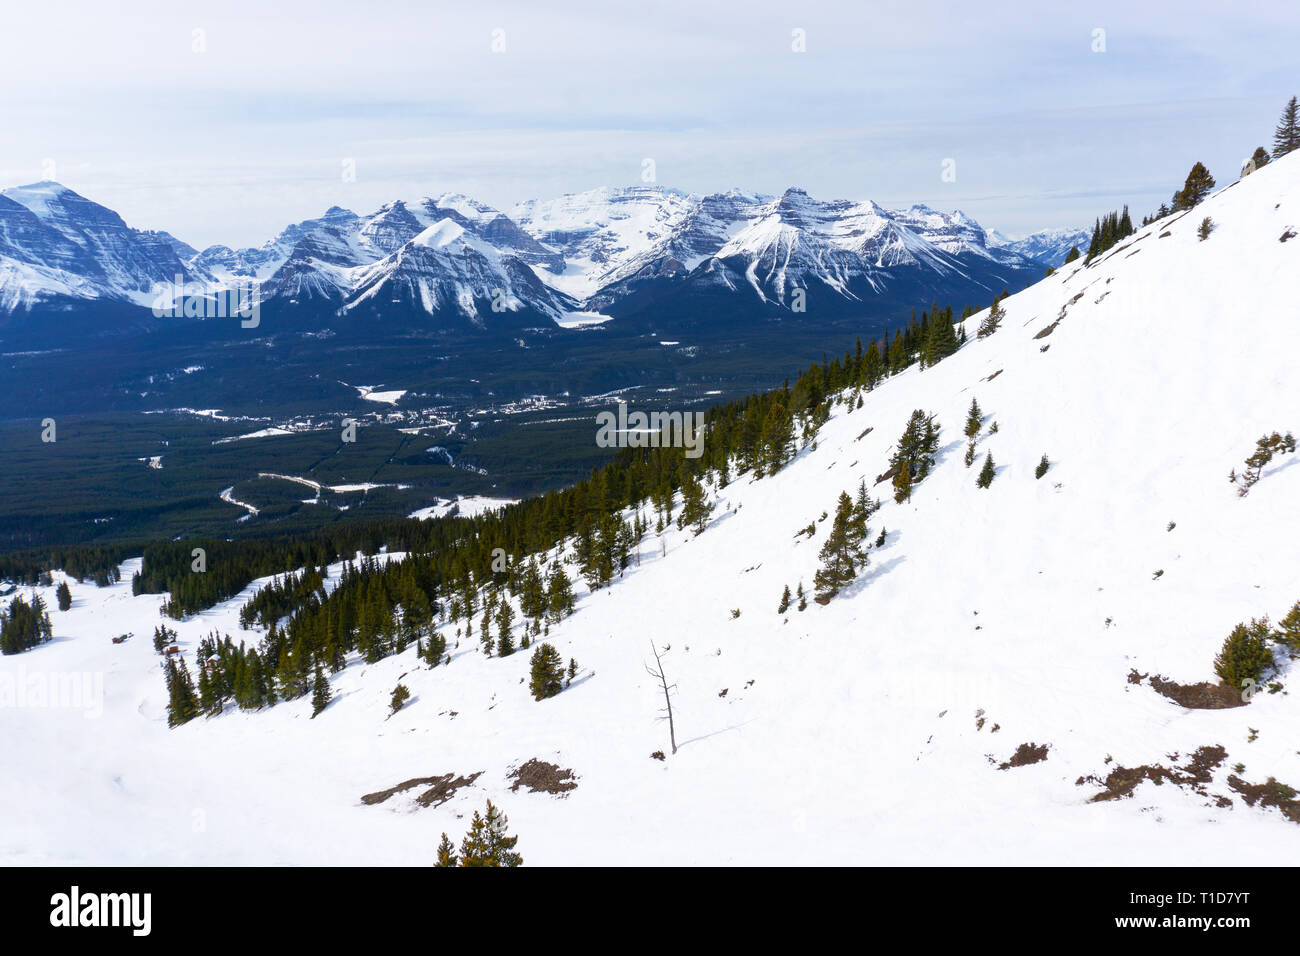 Snow-capped mountain landscape showing Mount Victoria glacier of the Canadian Rockies at Lake Louise near Banff National Park in Alberta, Canada. Stock Photo